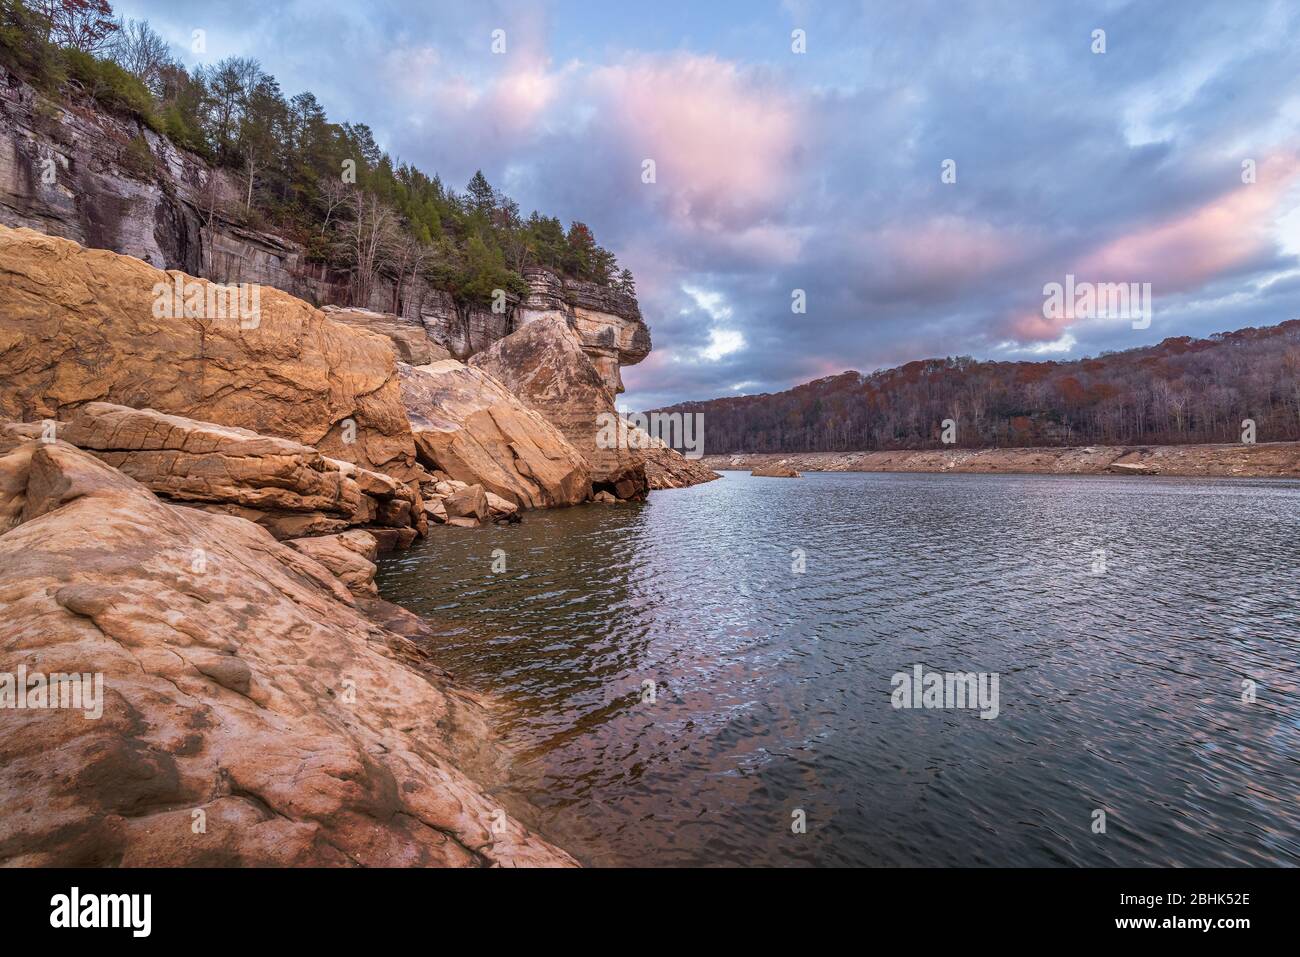 Summersville Lake drained for winter reveals house-sized boulders and high cliff lines topped with evergreens against a slightly broken, overcast sky. Stock Photo